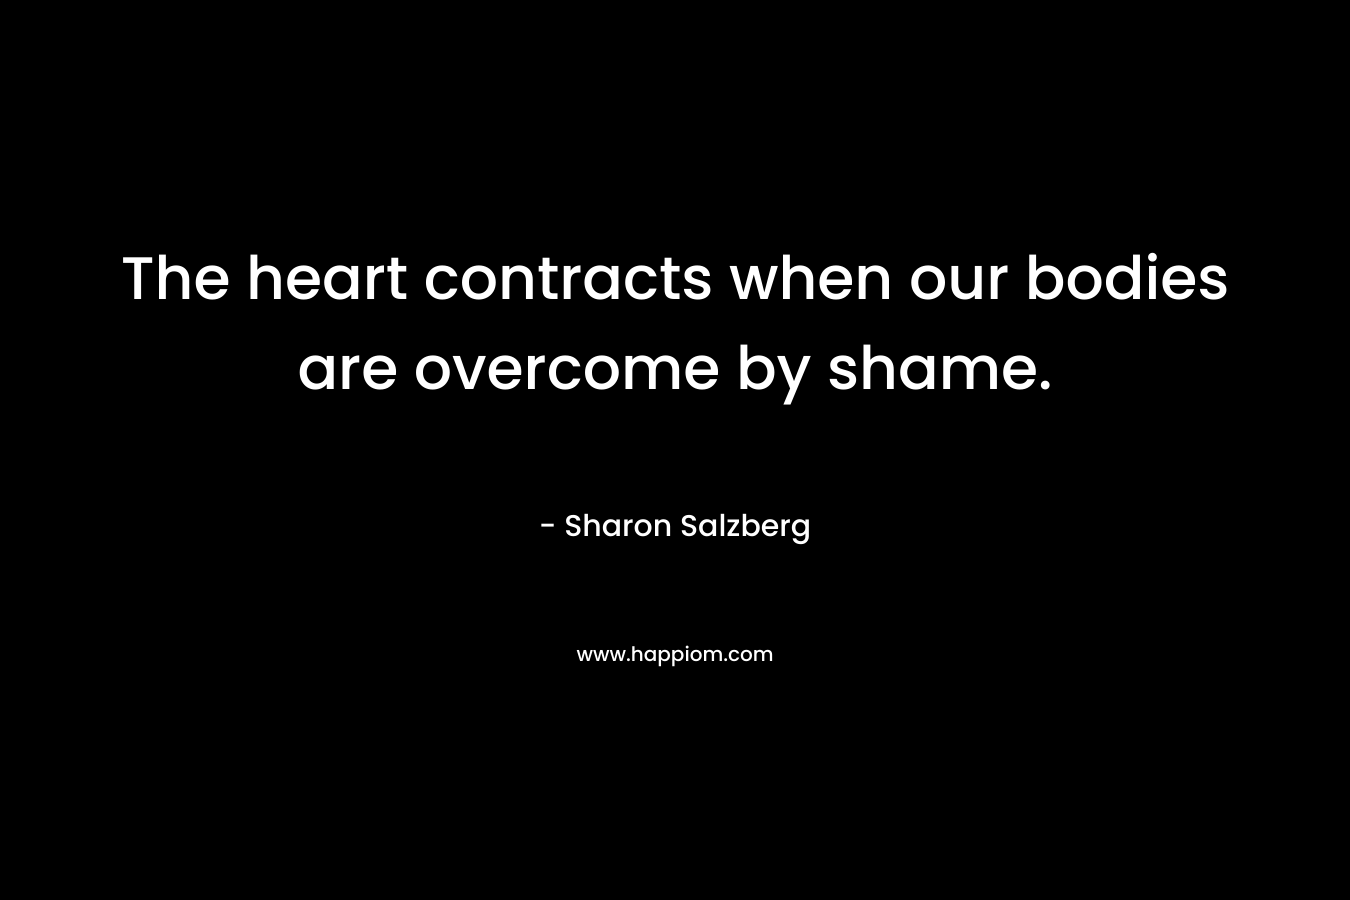 The heart contracts when our bodies are overcome by shame. – Sharon Salzberg